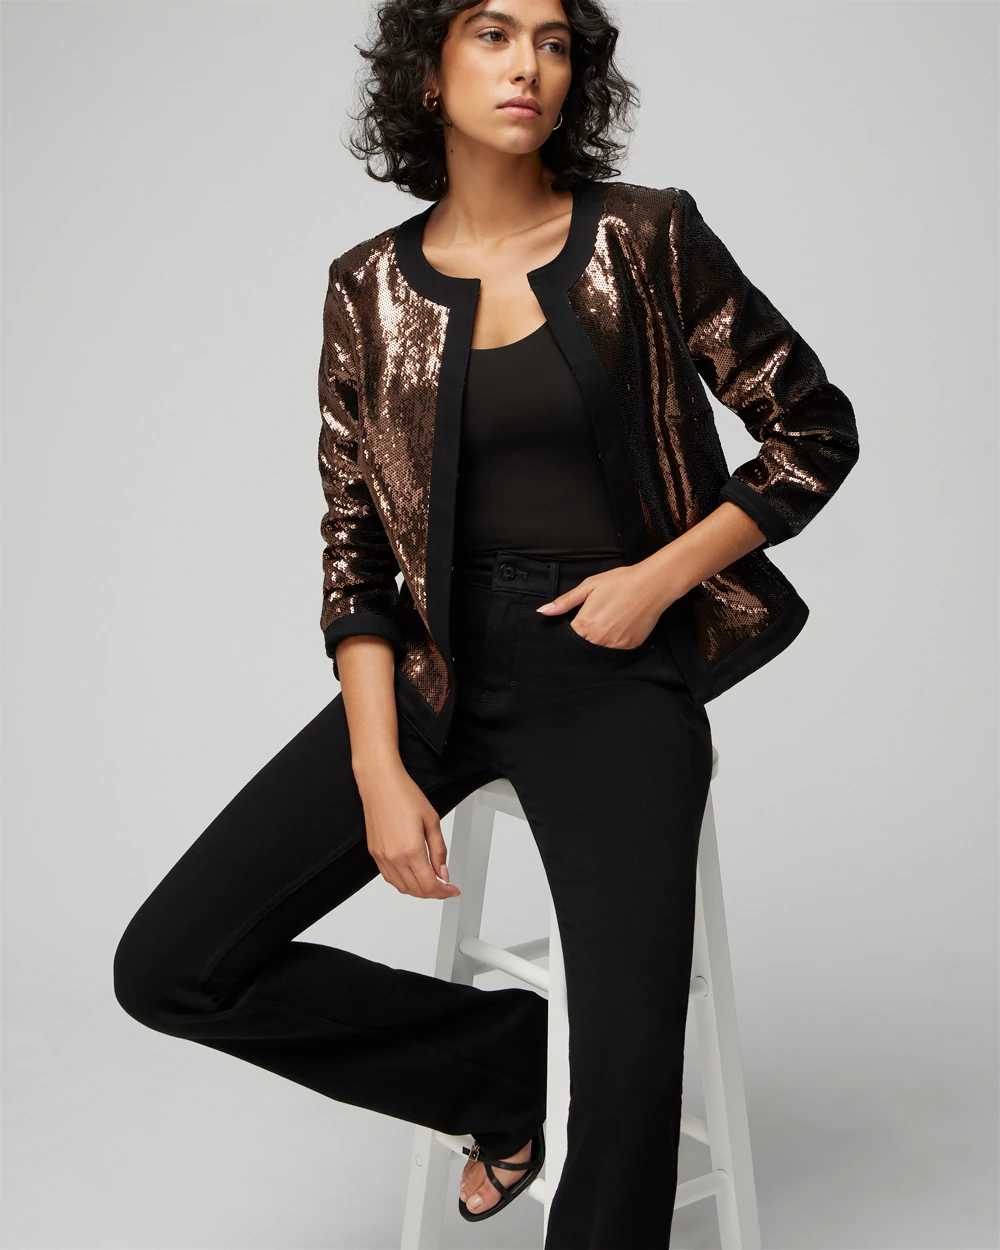 WHBM® Sequin Stylist Jacket click to view larger image.